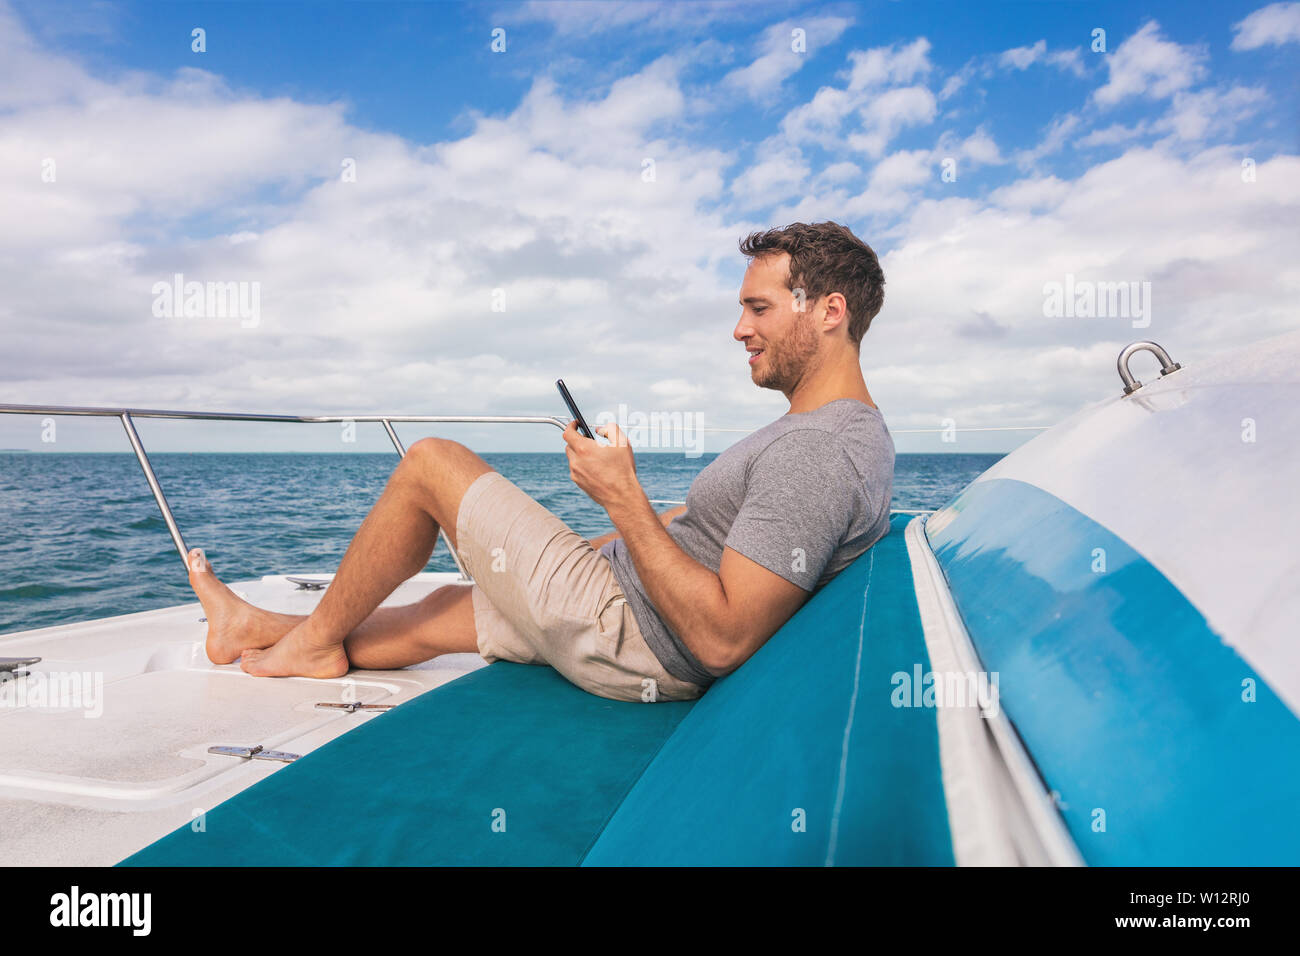 Boat man using mobile phone texting on satellite internet while relaxing on deck of yacht luxury lifestyle. Stock Photo